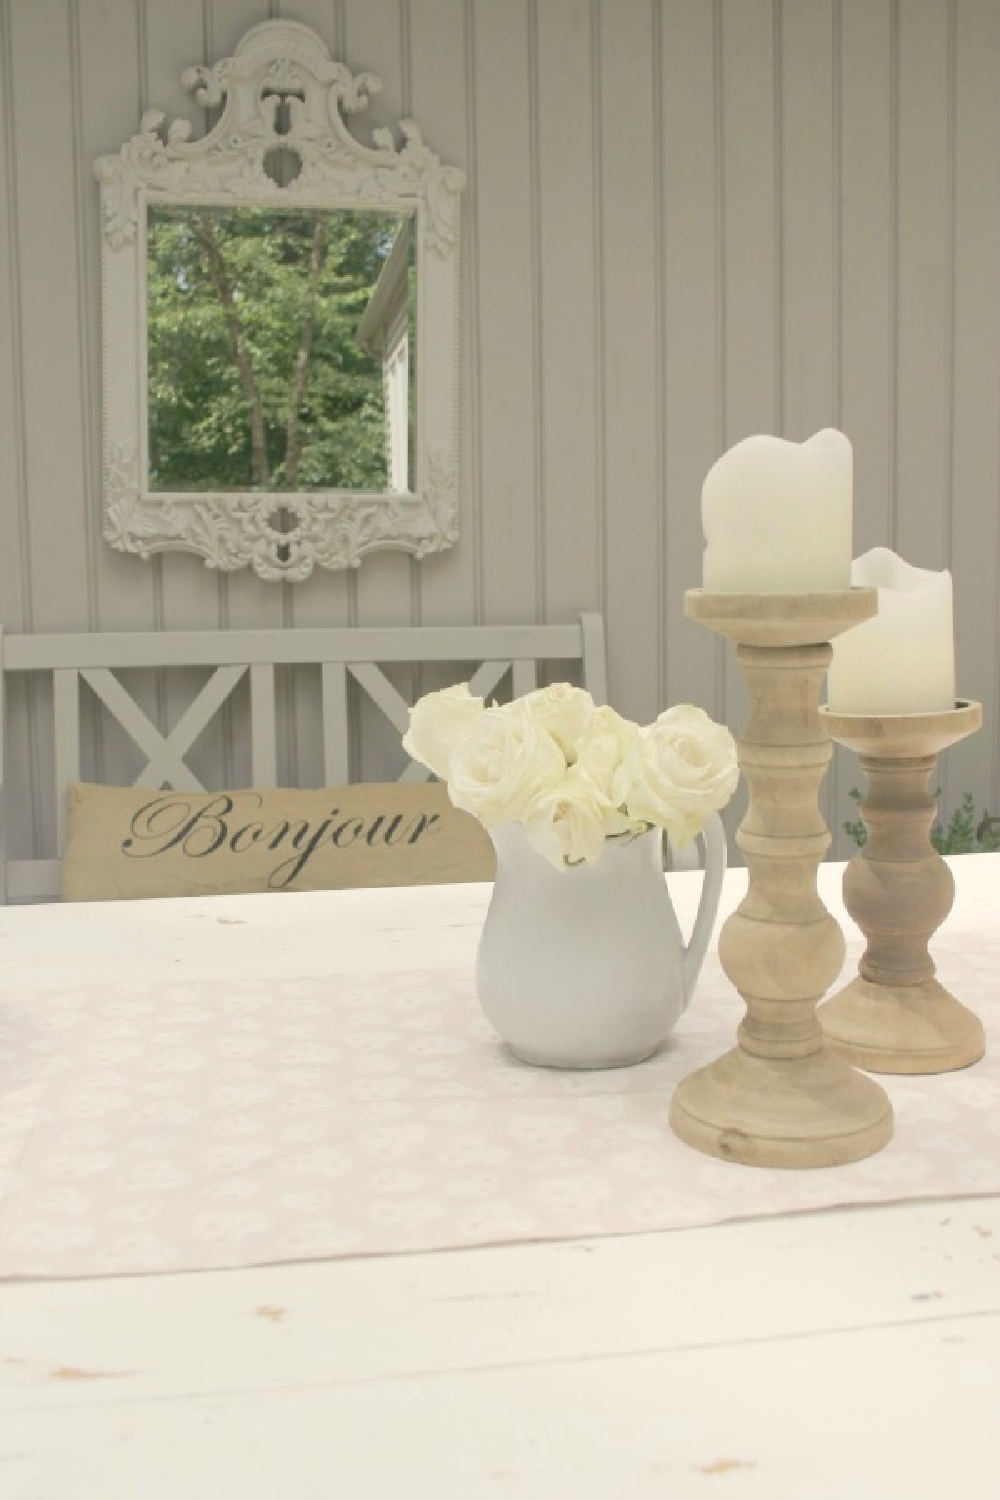 Rustic candle holders, white roses, and a French mirror in our courtyard - Hello Lovely Studio.